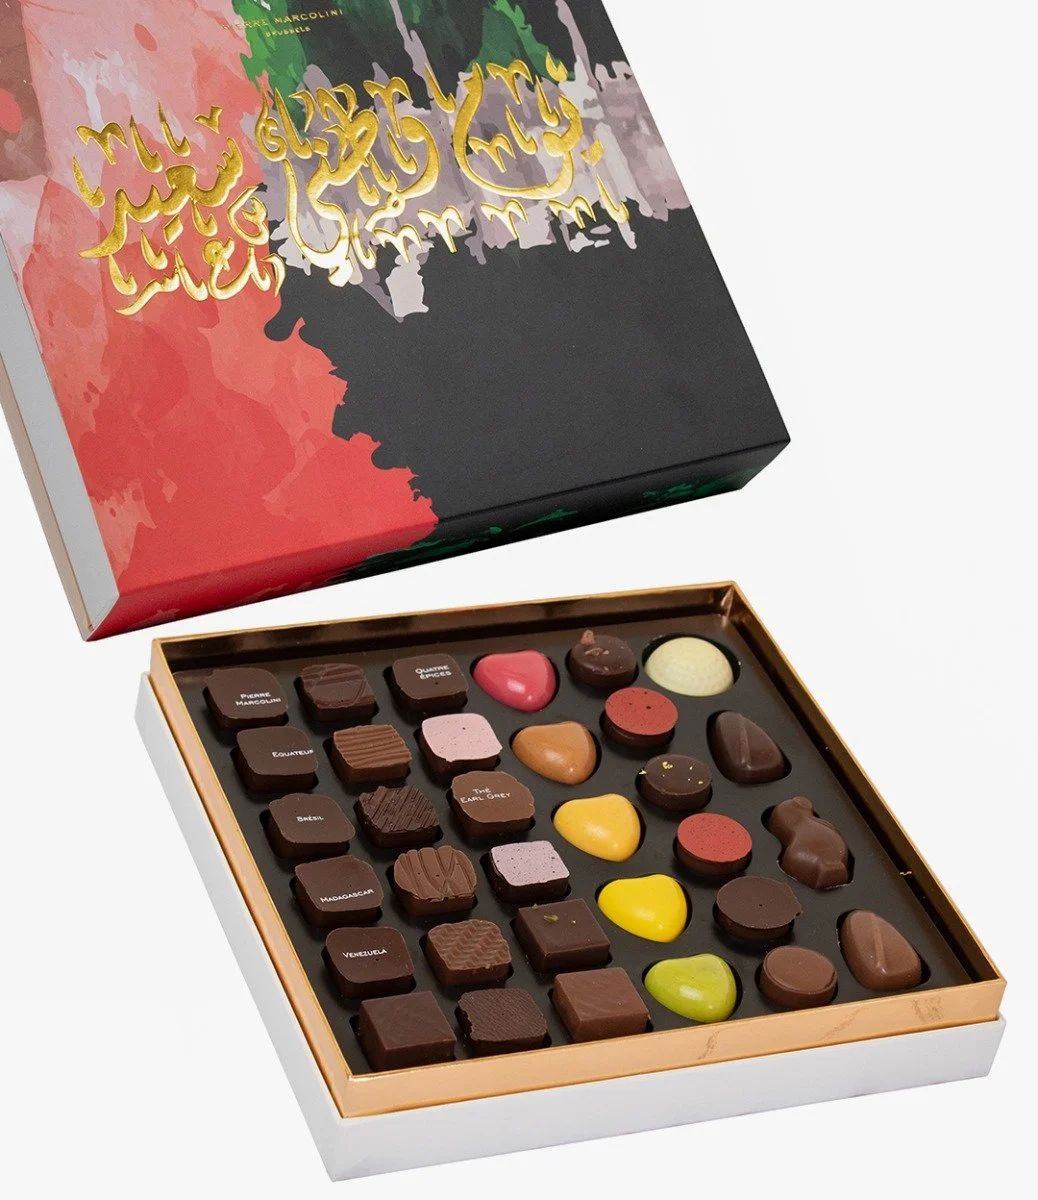 Malline Decouverte National Day 2022 Collection by Pierre Marcolini